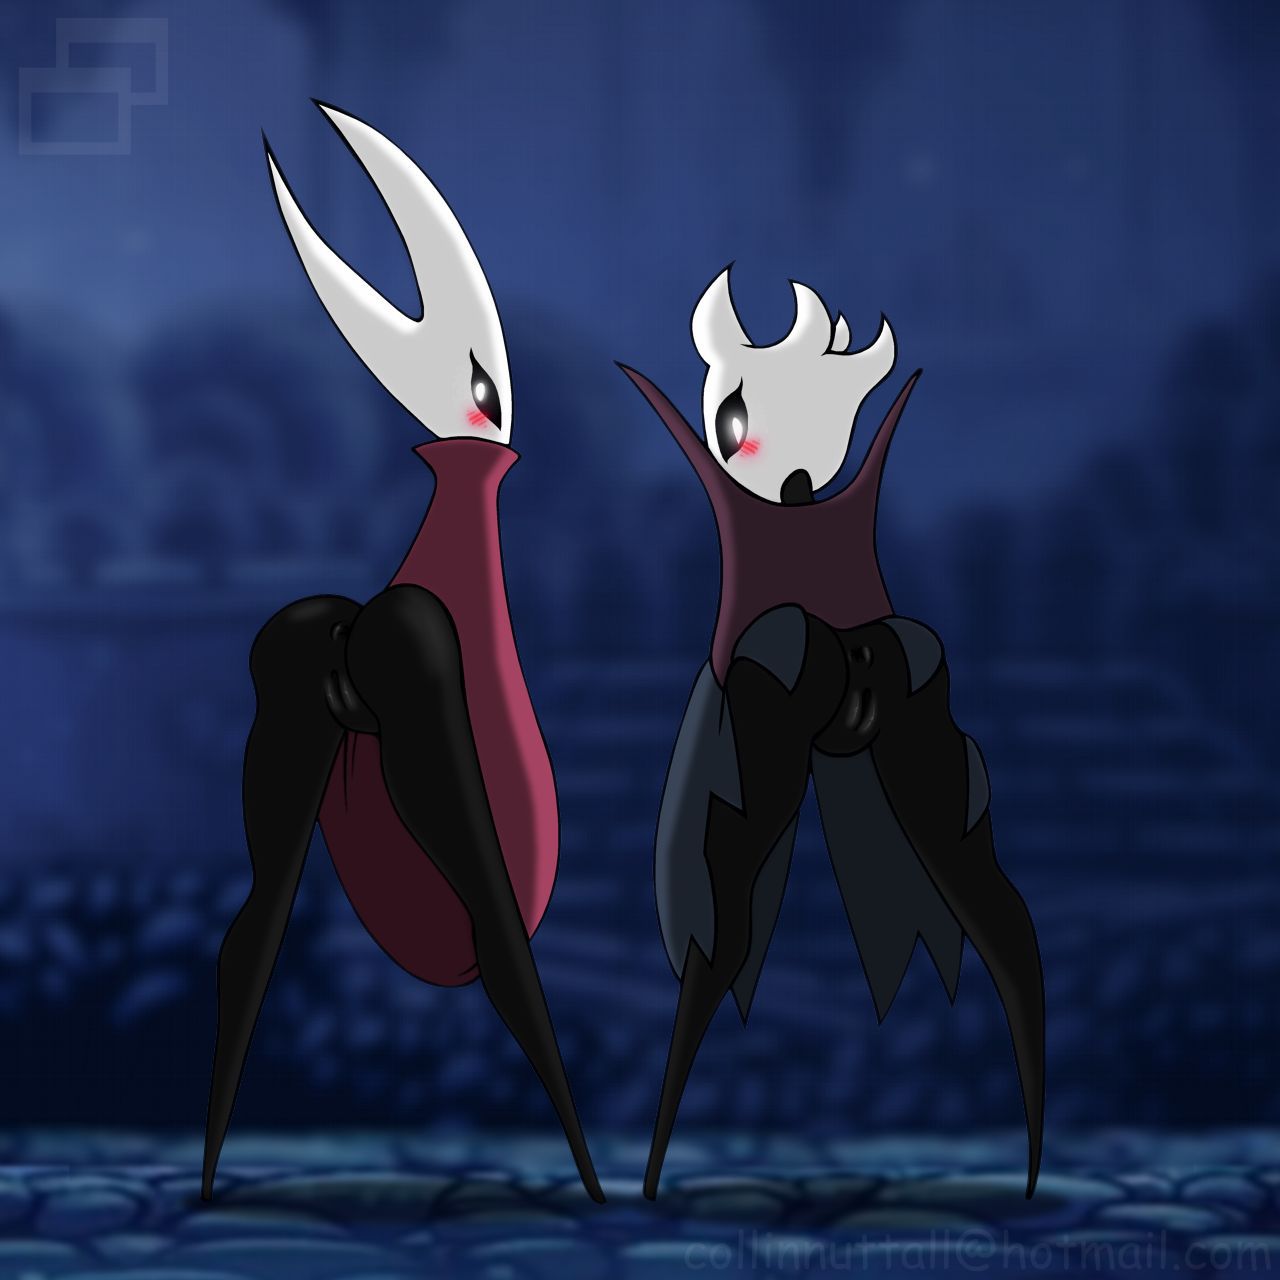 Hollow knight collection 47